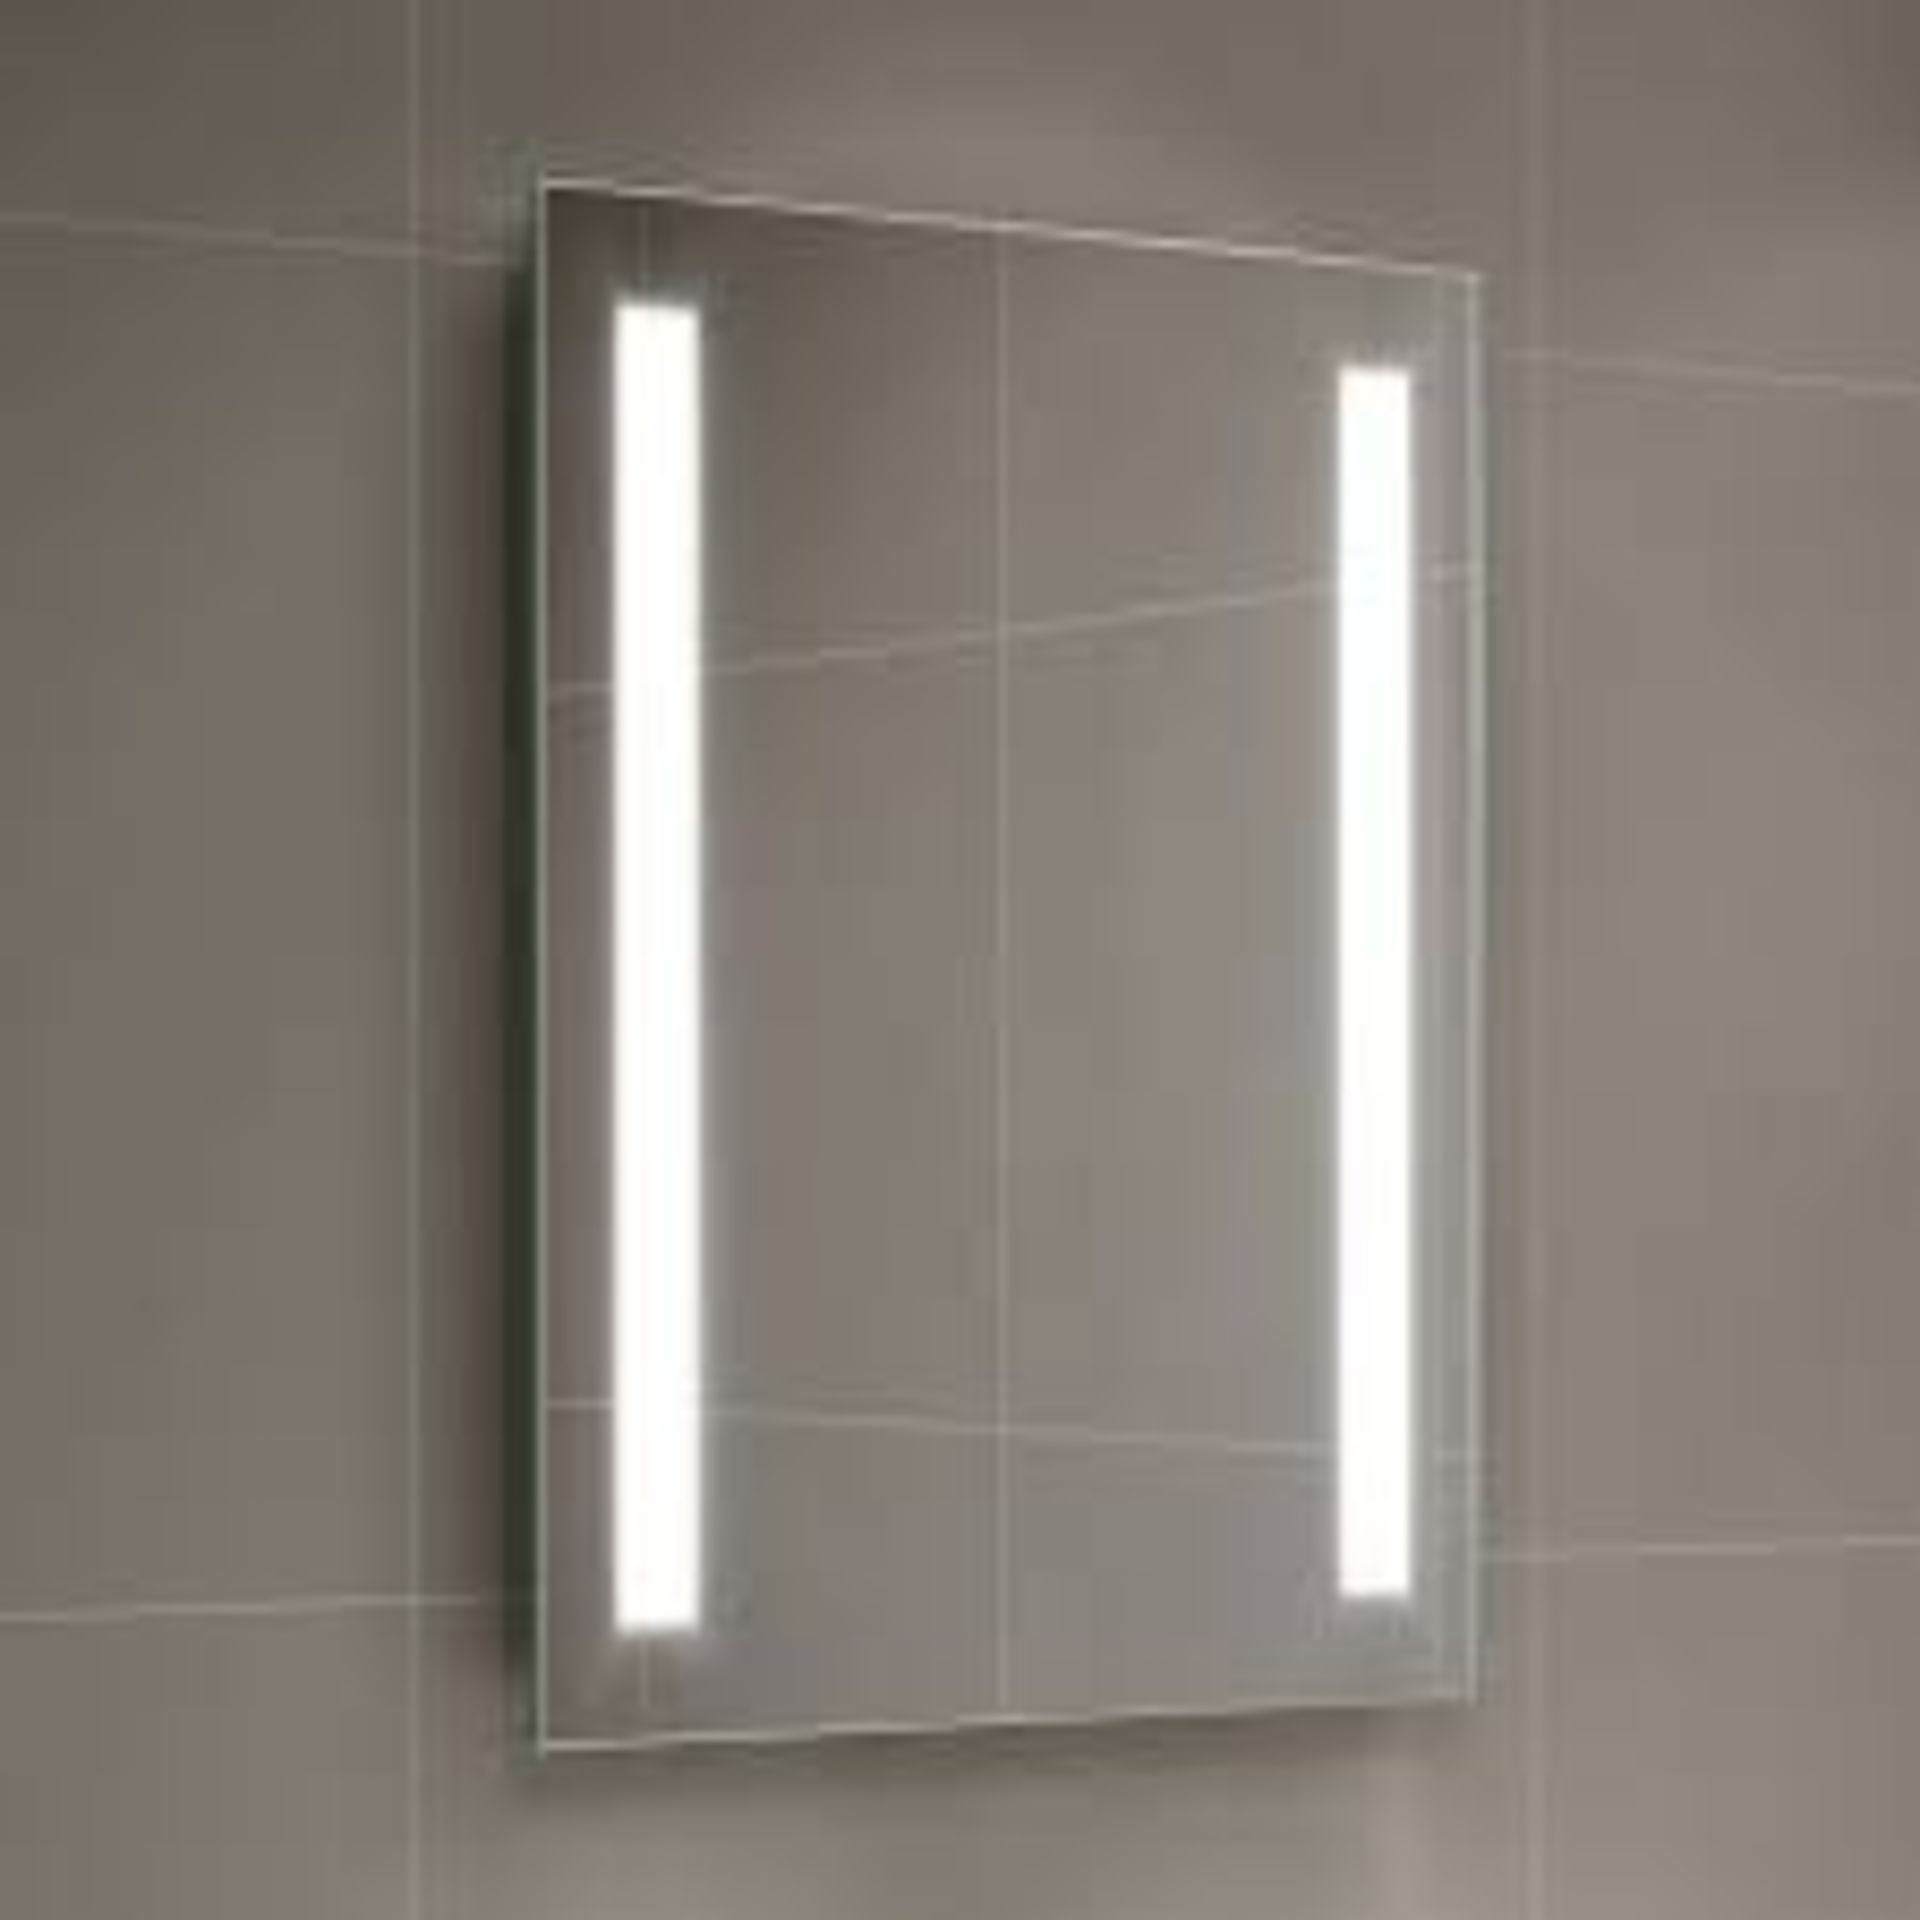 (J120) 500x700mm Omega LED Mirror - Battery Operated. RRP £299.99. Energy saving controlled On / Off